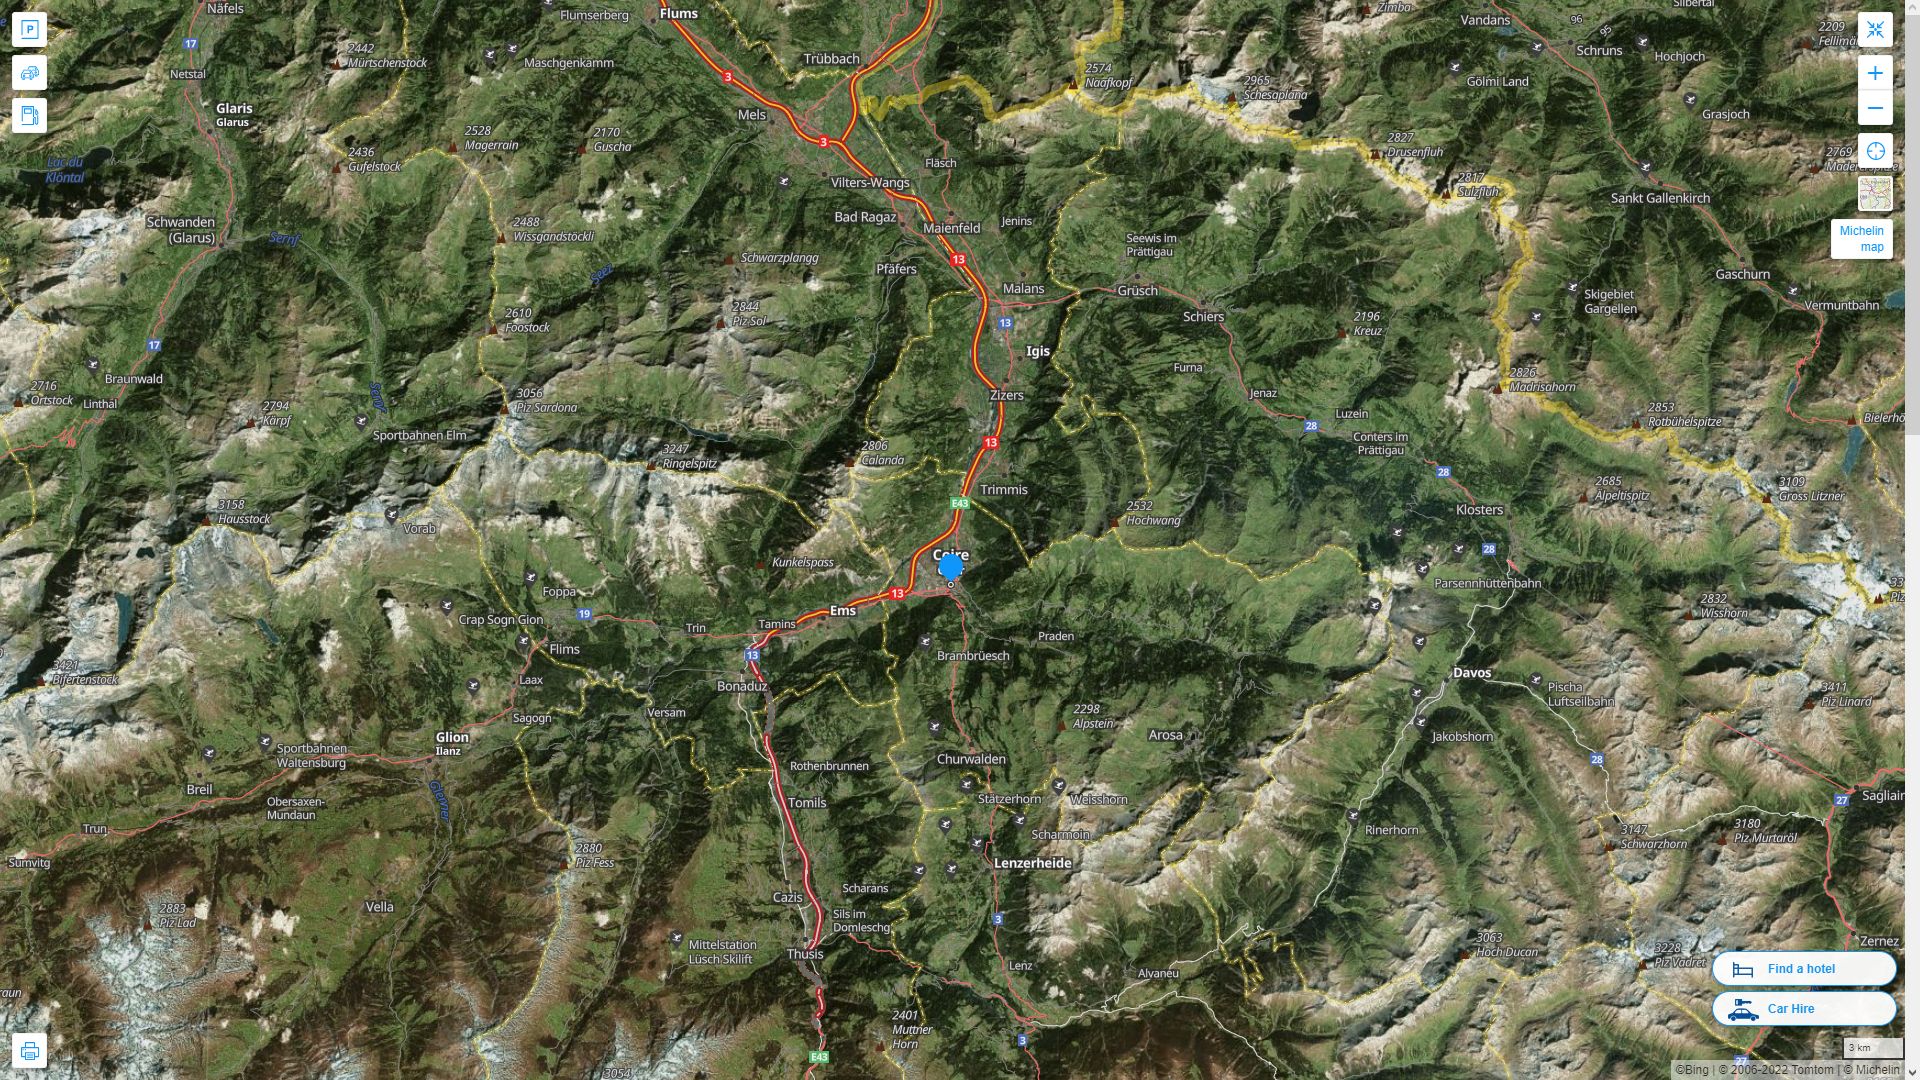 Chur Highway and Road Map with Satellite View